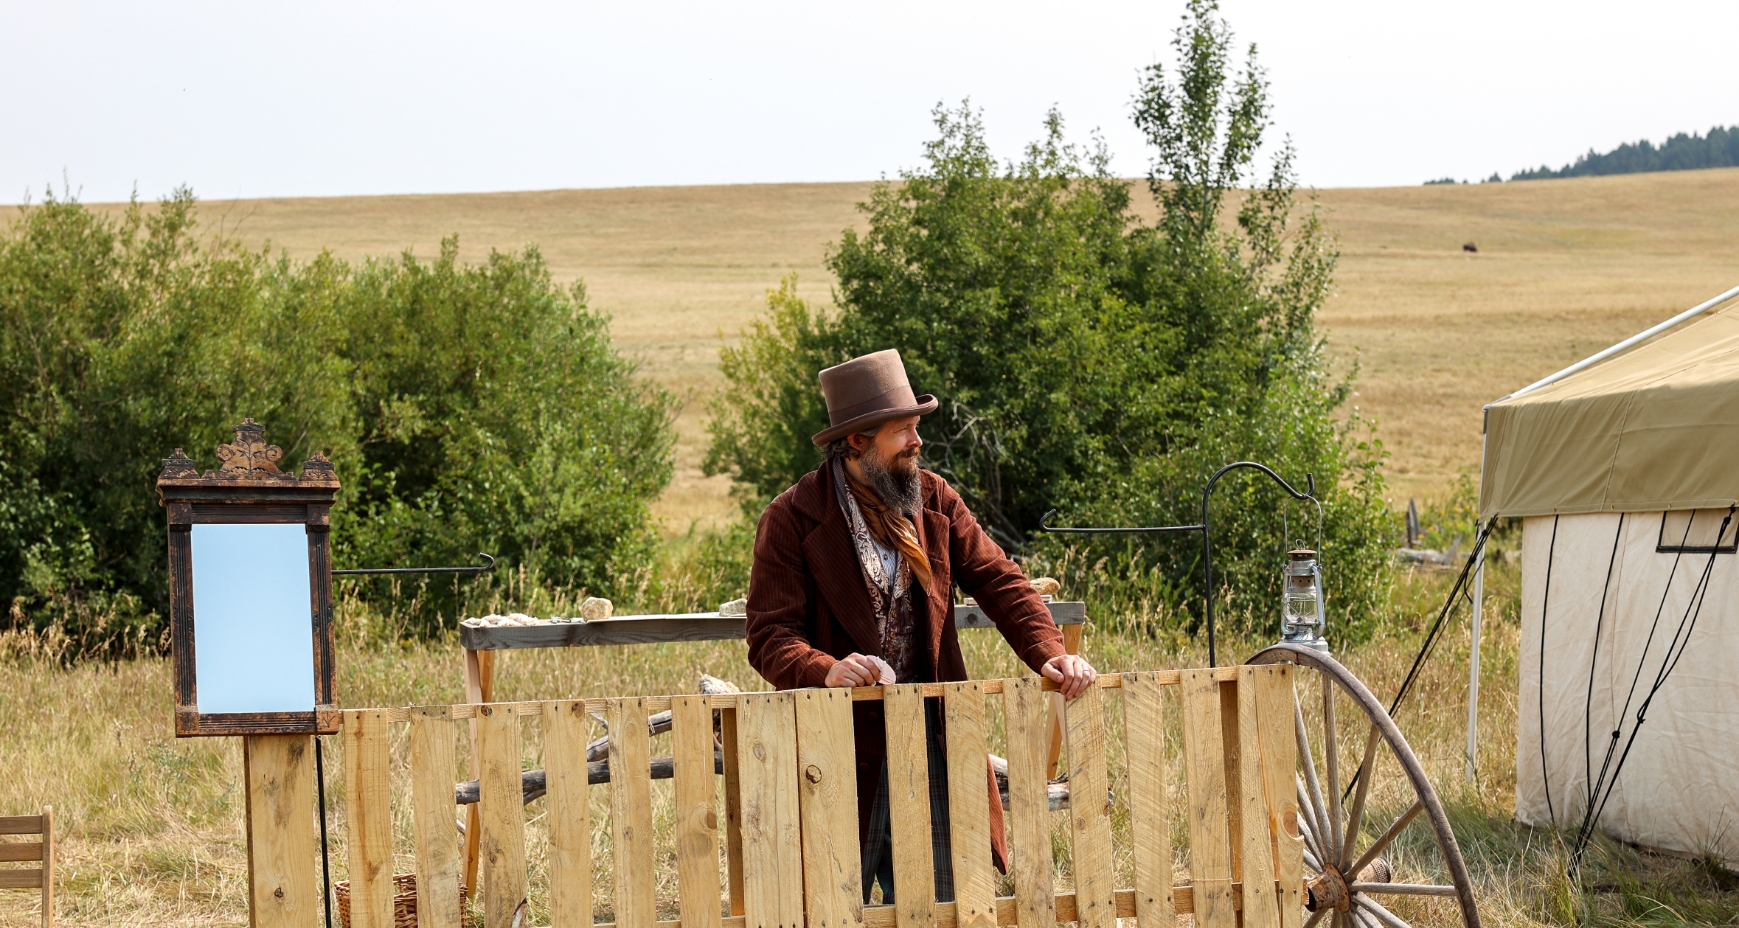 The Snake Oil Salesman Waits To Deliver A Rare Experience At An Old West Event In Southern Montana